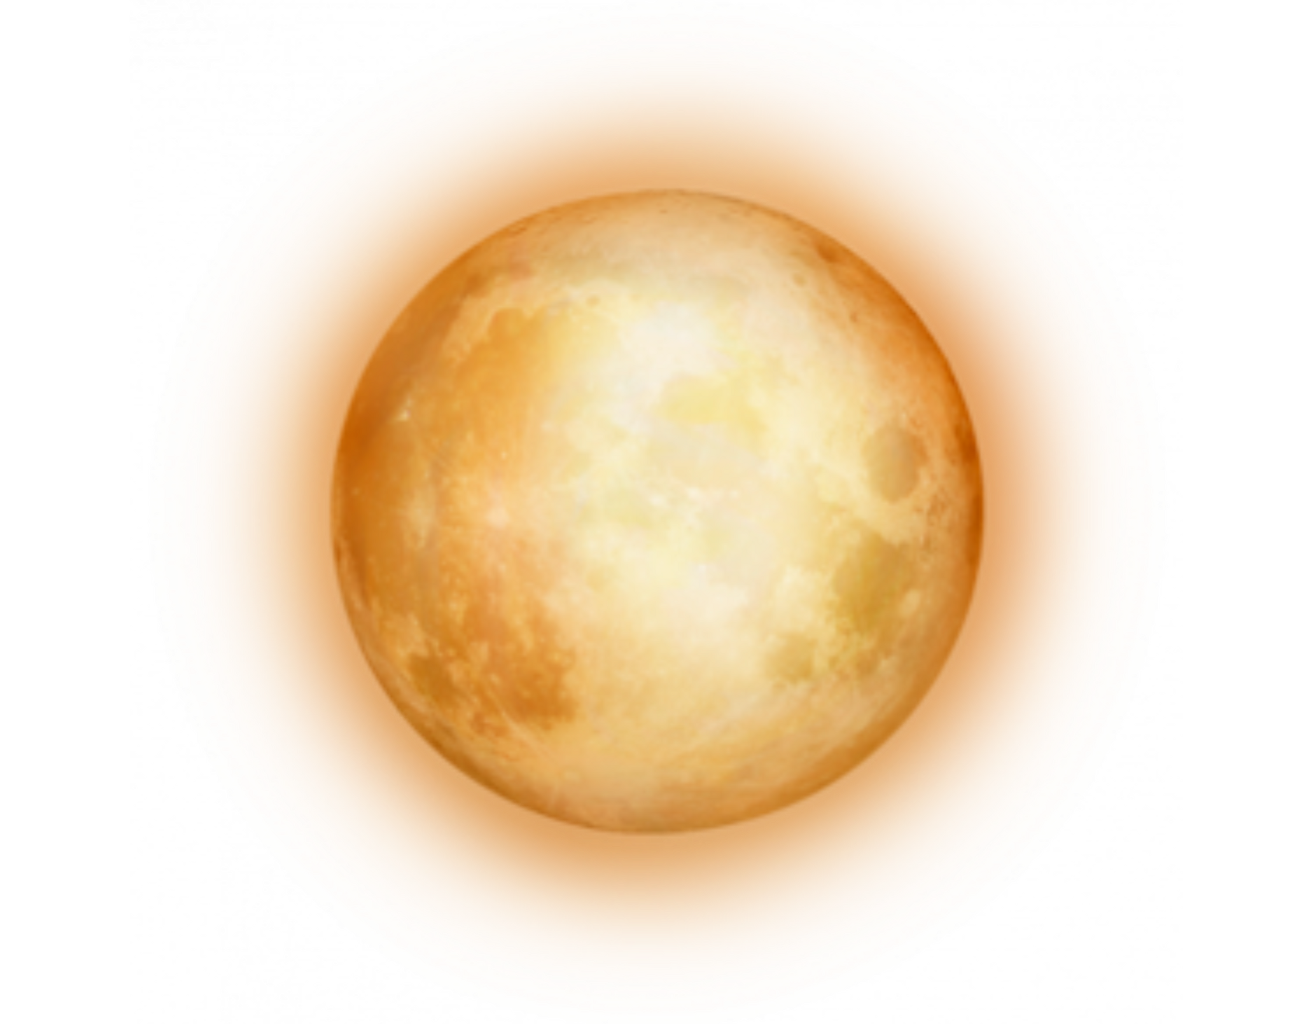 planet clipart glowing